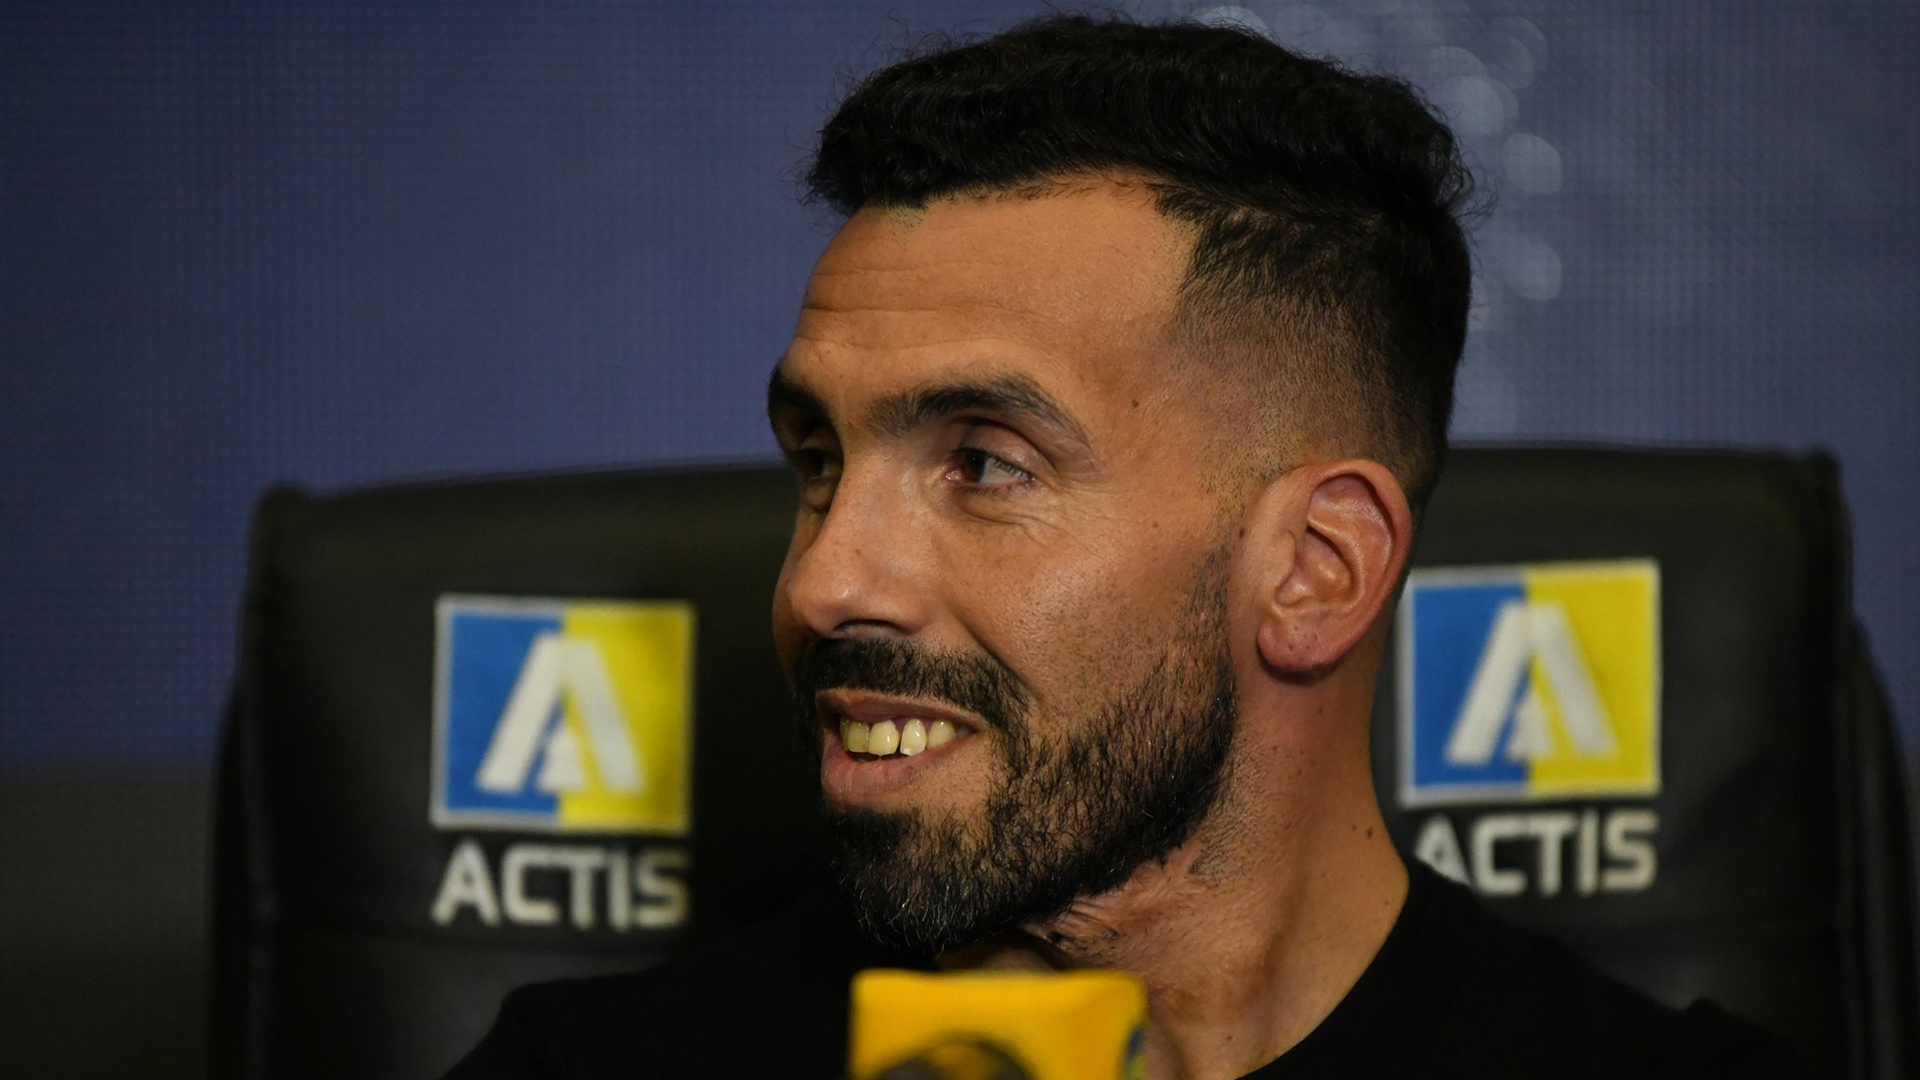 Except for the question about his DT title, Carlitos deepened each answer (@RosarioCentral)